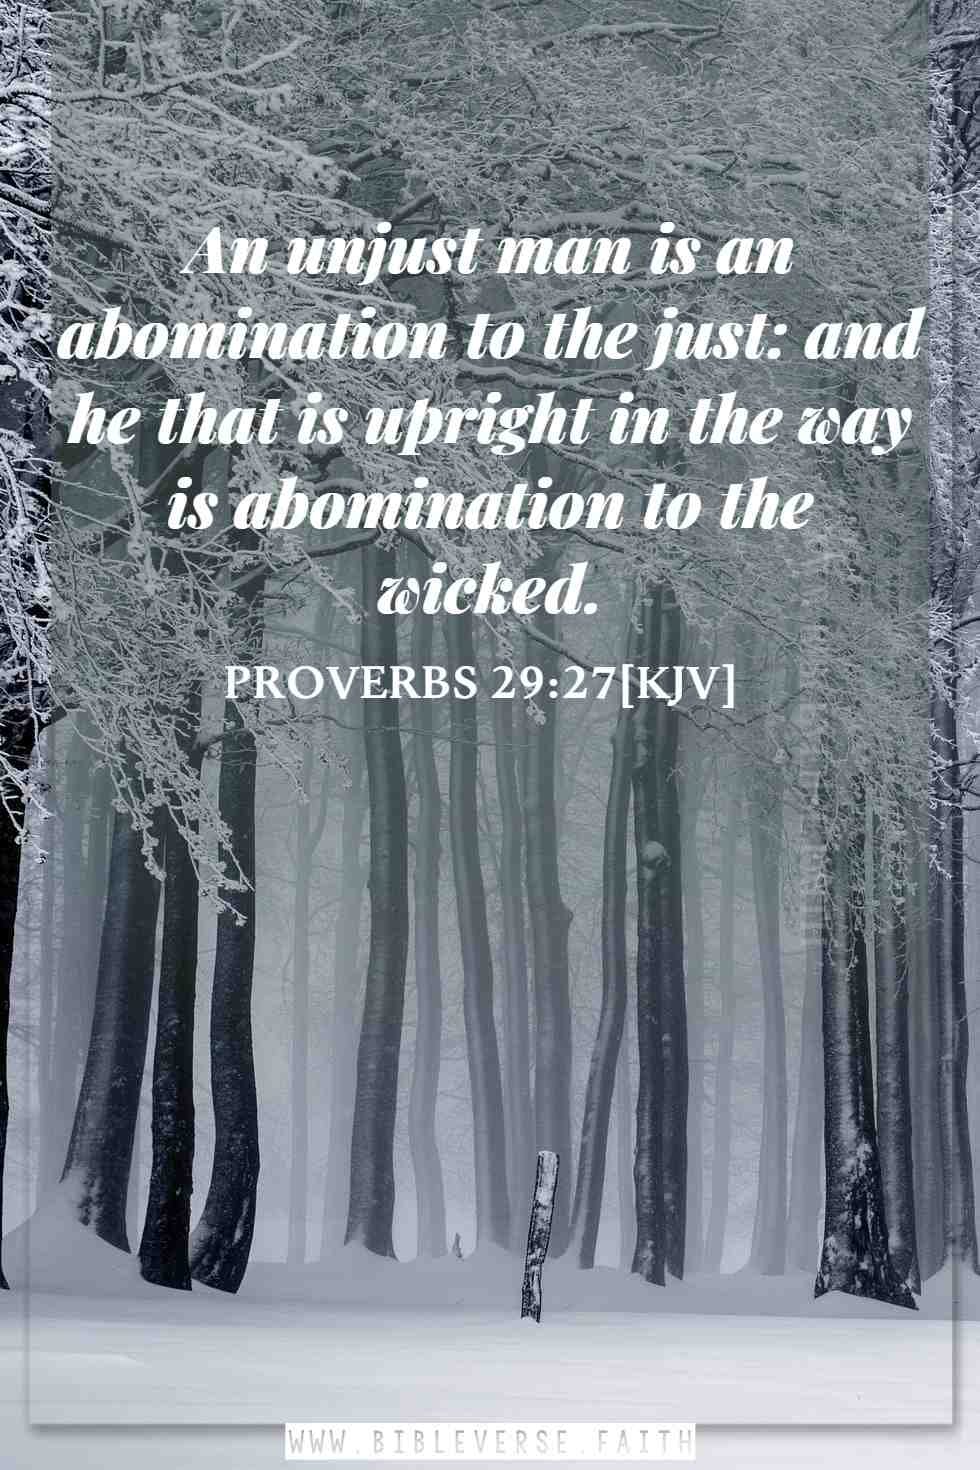 proverbs 29 27[kjv] abomination in the bible